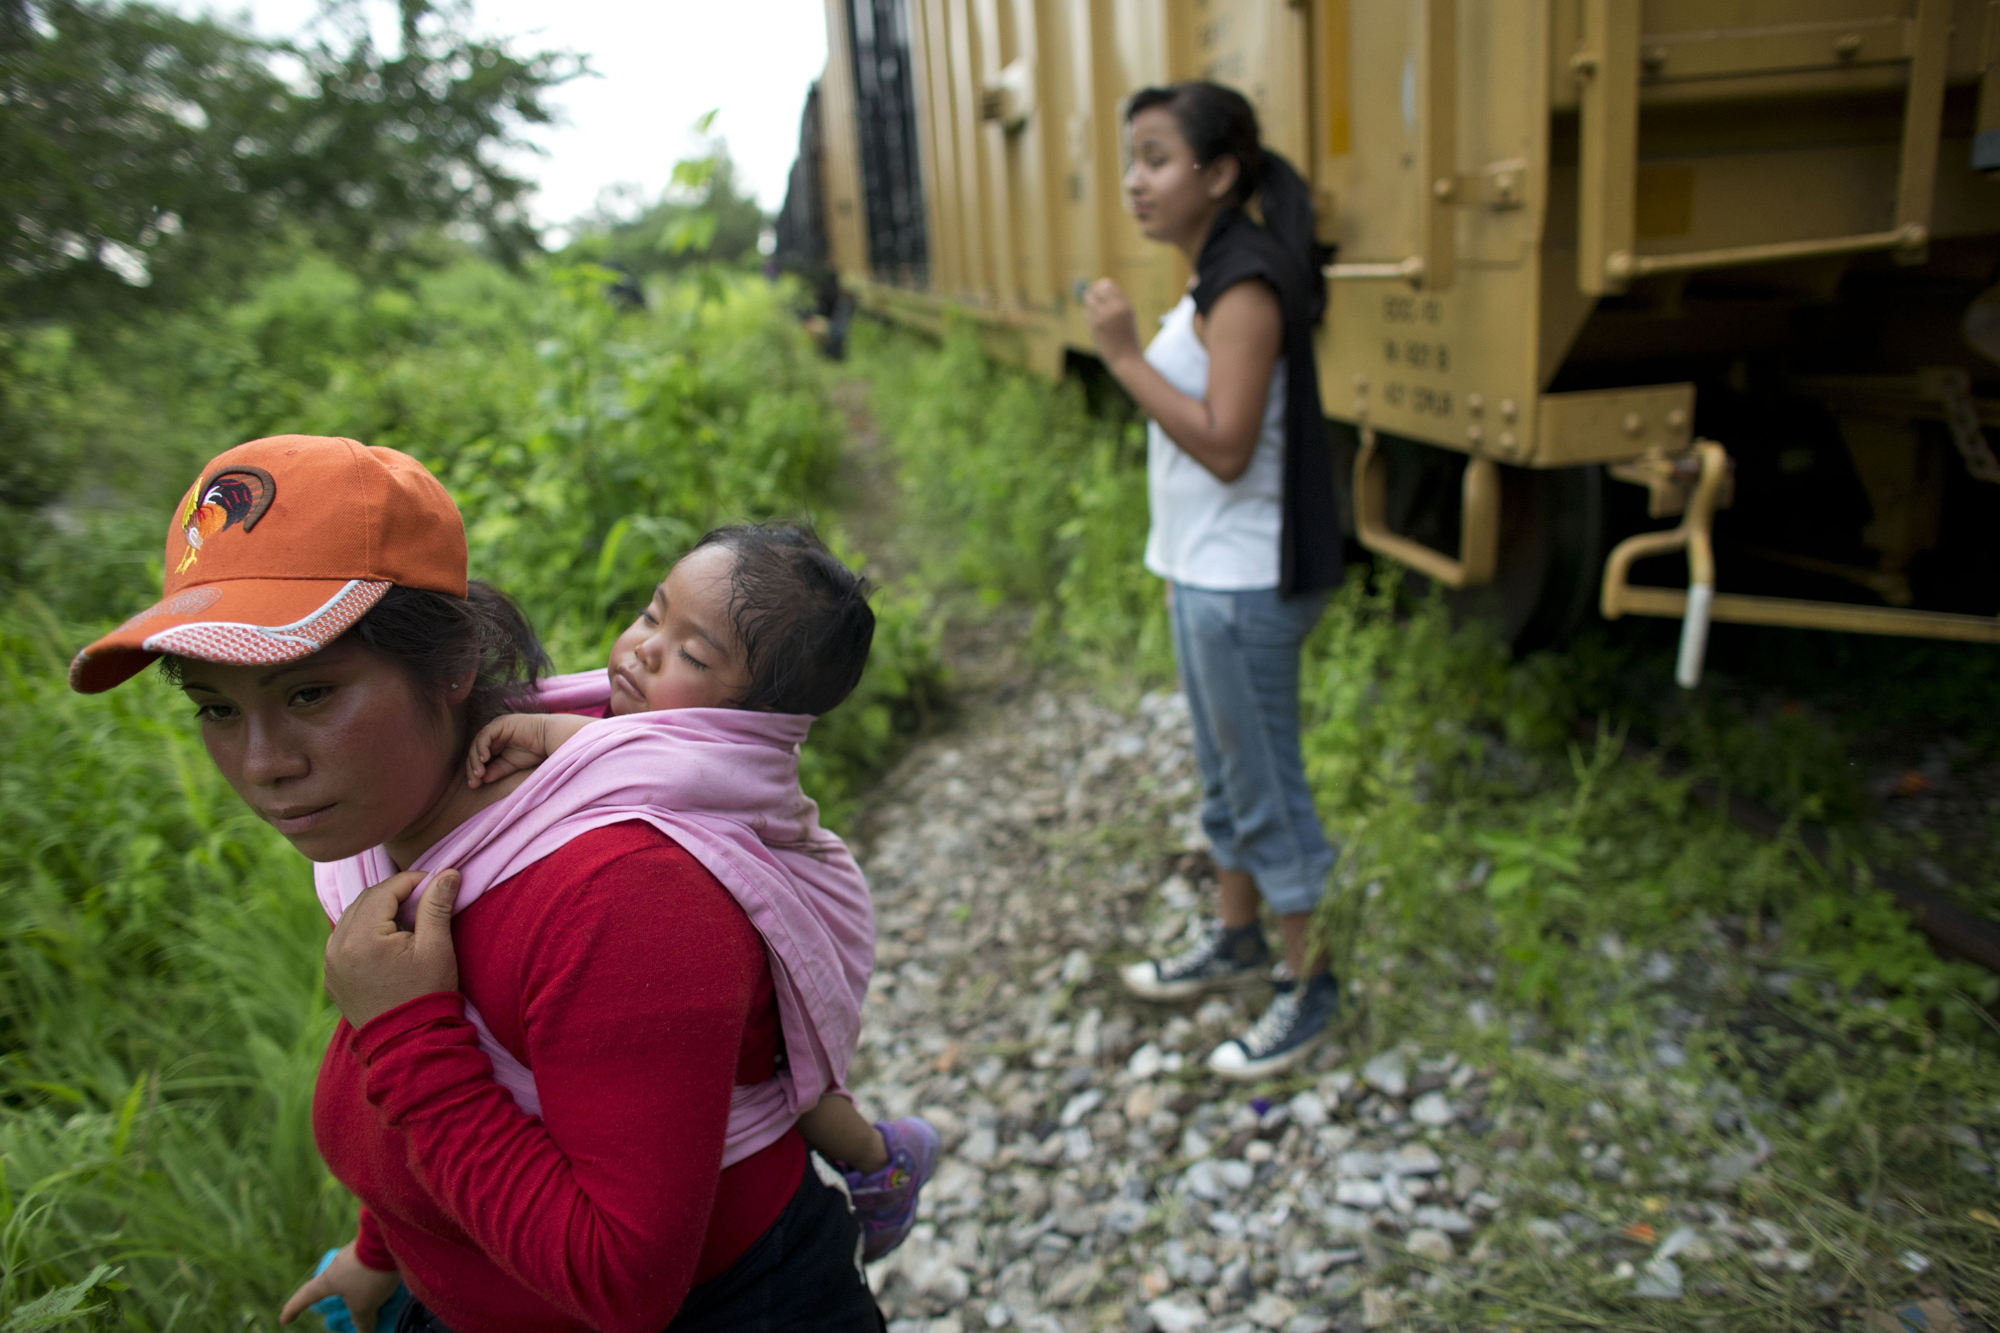 Guatemalan migrant Gladys Chinoy, 14, right, waits with more than 500 other migrants, many traveling with small children, beside the stuck freight train on which they were traveling, outside Reforma de Pineda, Mexico, June 20.